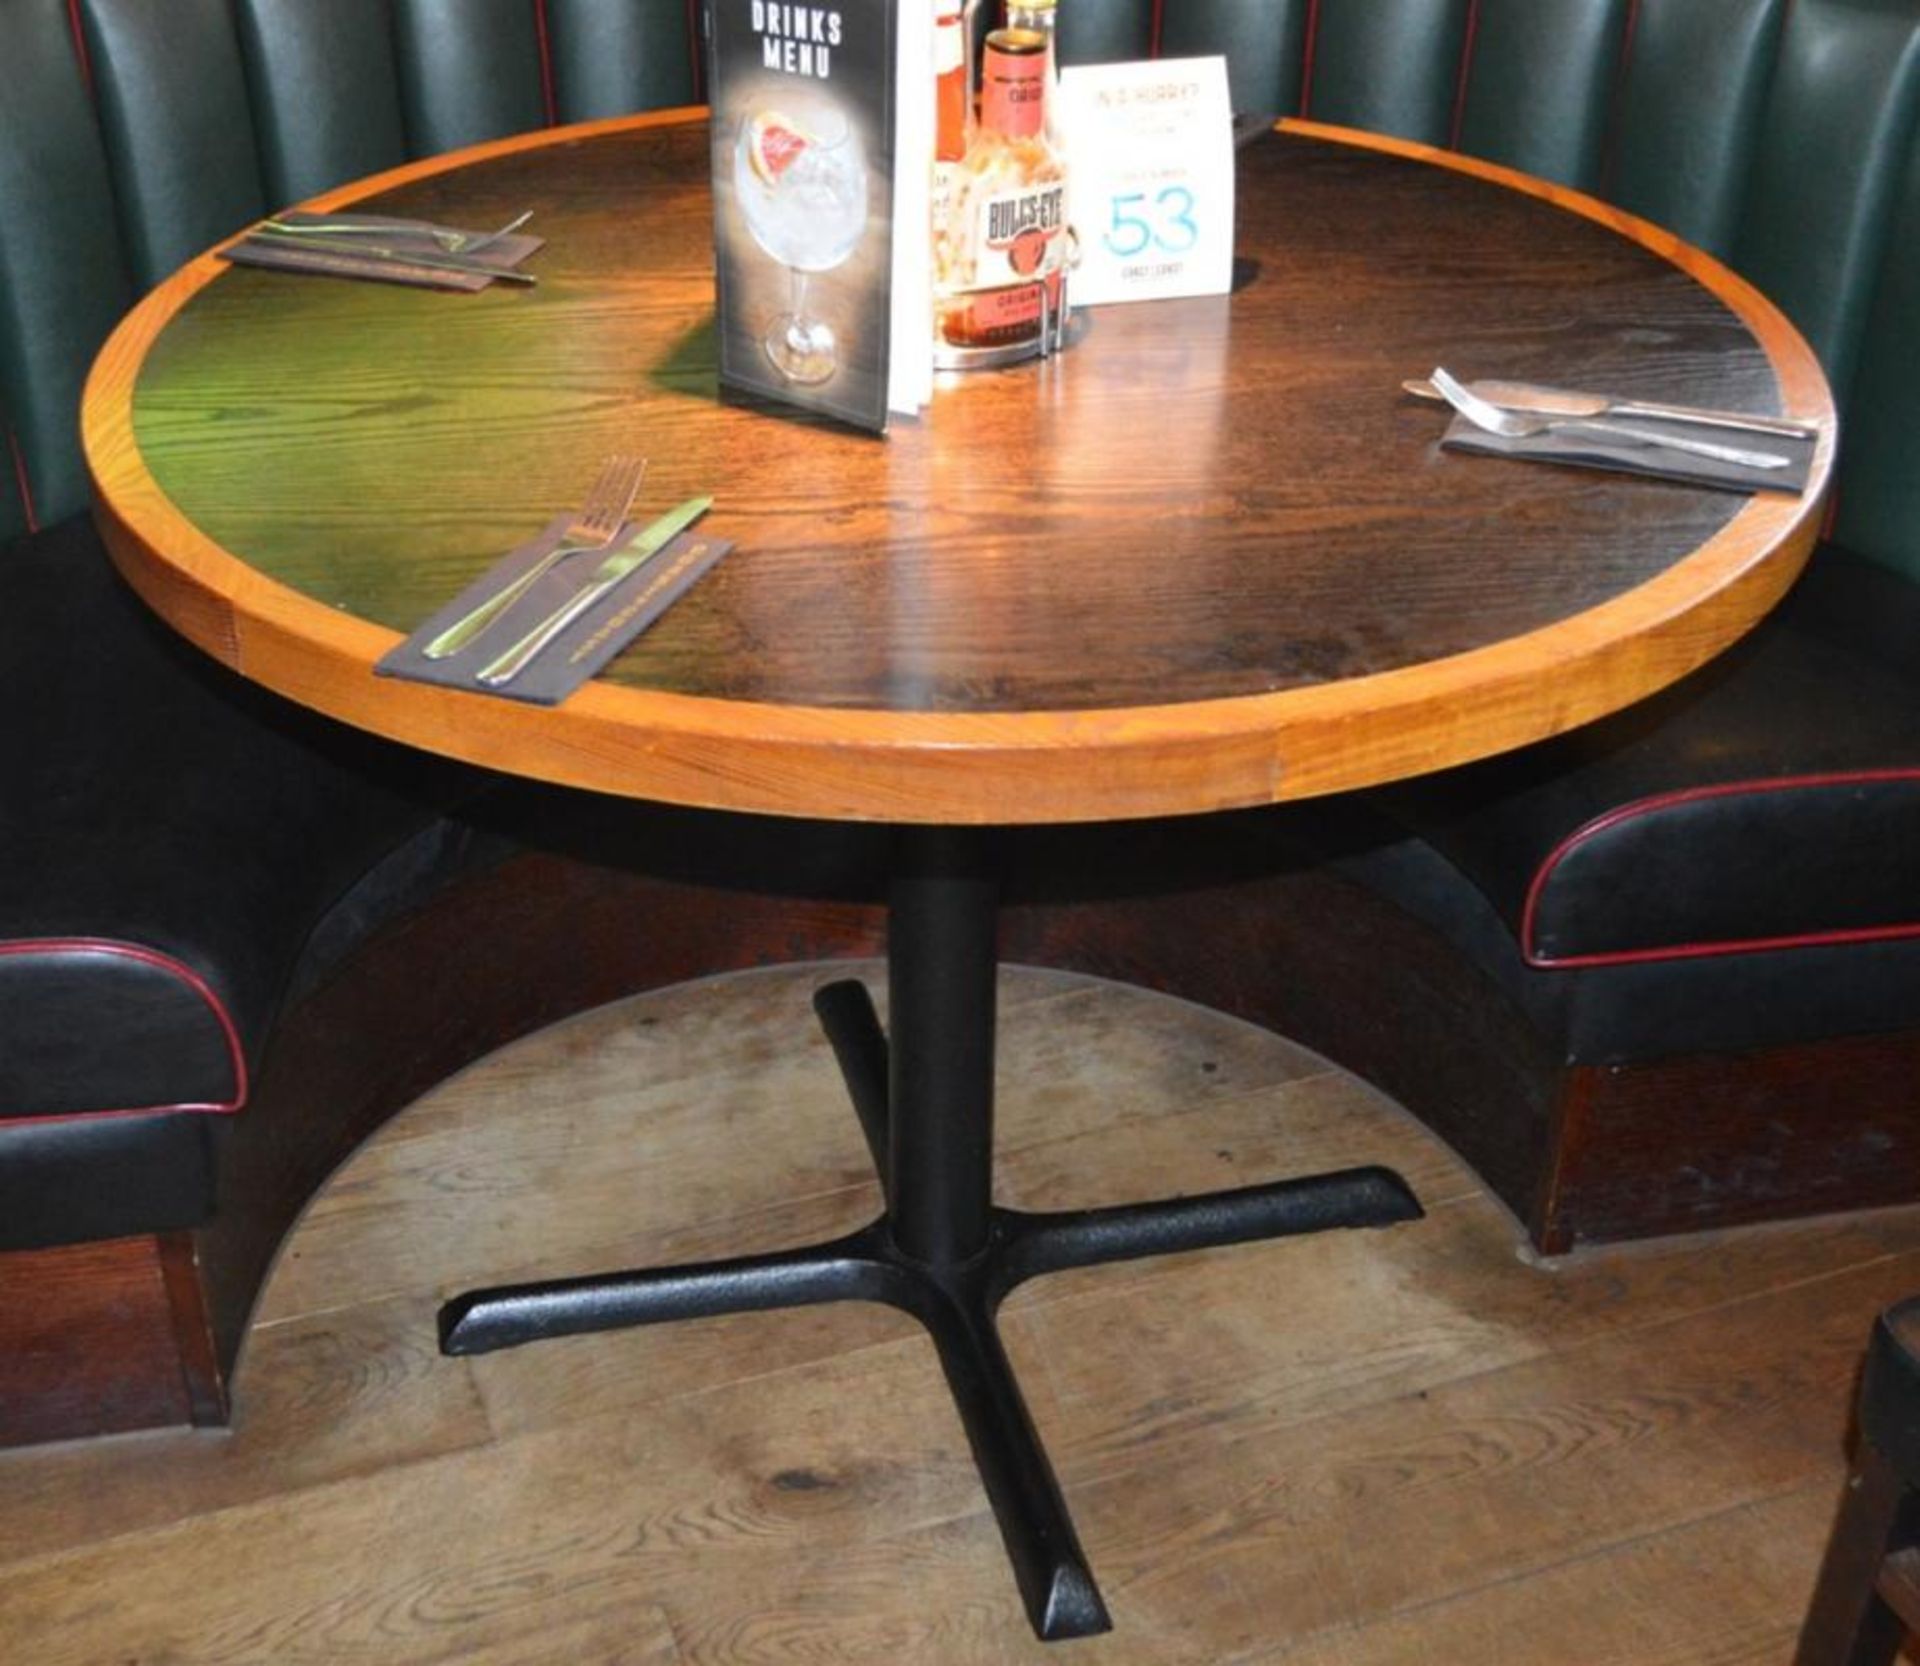 1 x Restaurant Dining Table With Cast Iron Base - Two Tone Wooden Finish With Shaped Edges - H76 x